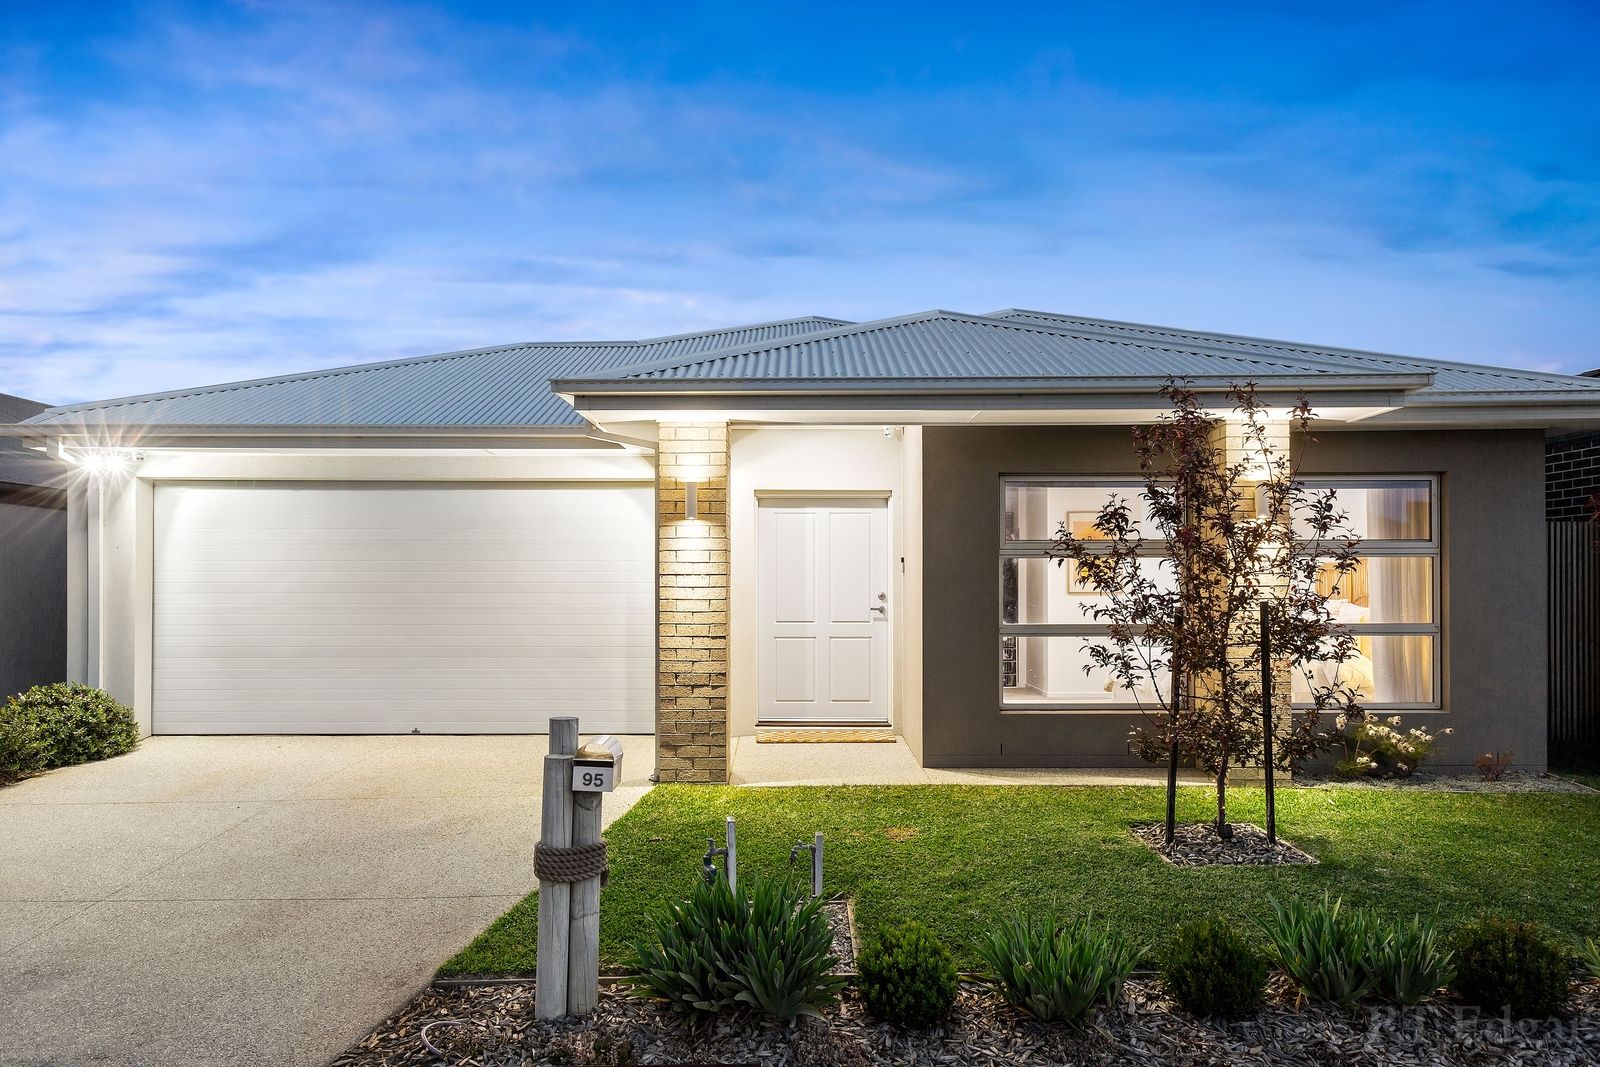 4 bedrooms House in 95 Naturaliste Way ARMSTRONG CREEK VIC, 3217